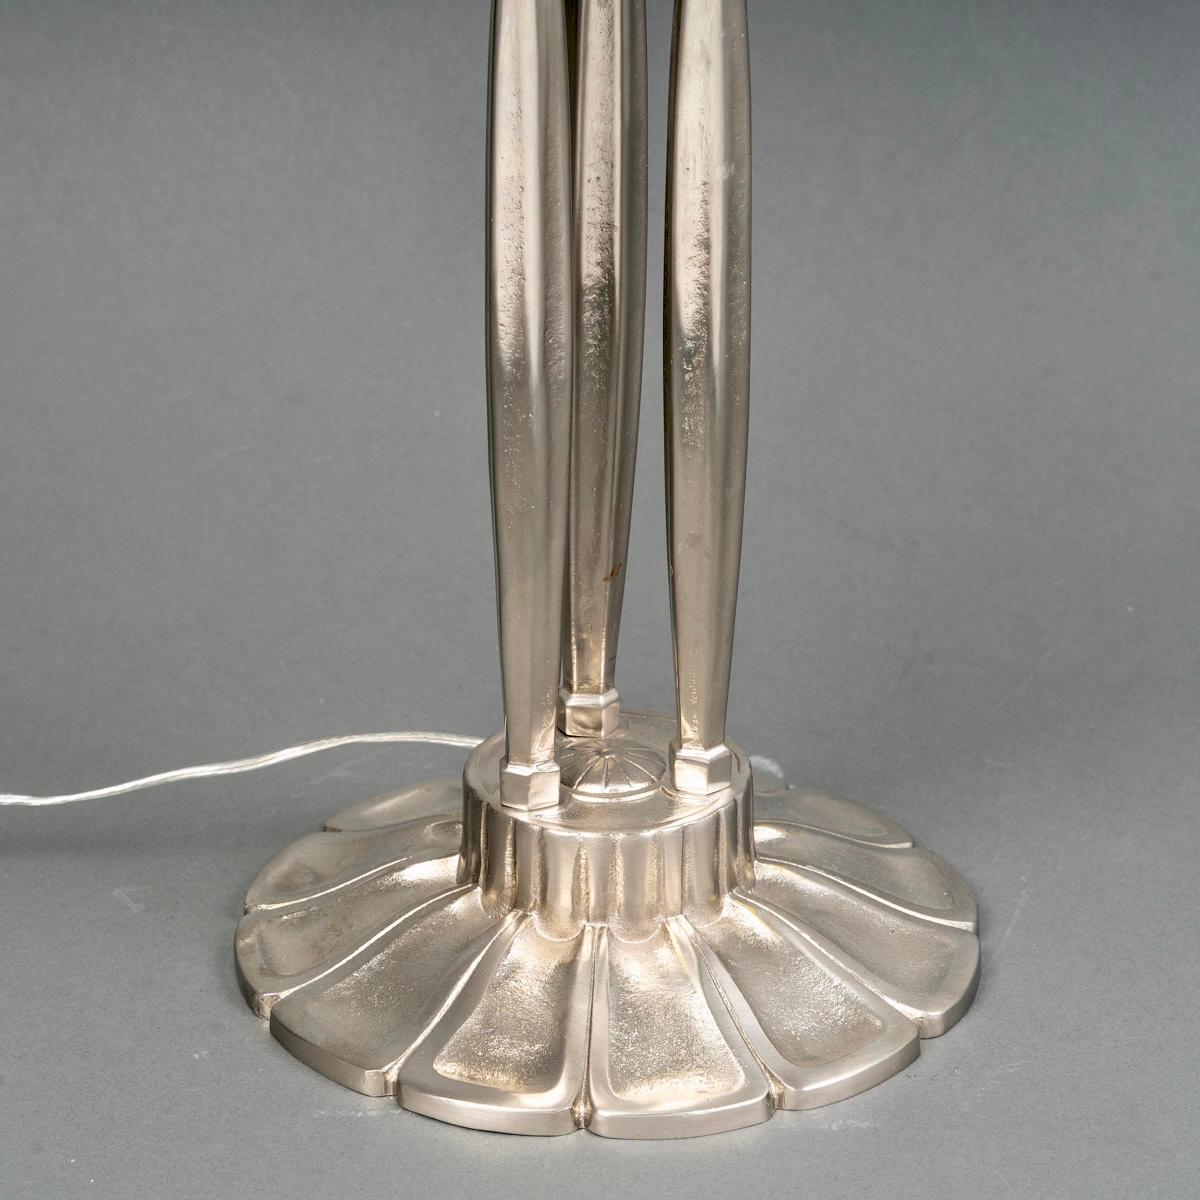 1924 René Lalique - Lamp Coquilles Shells Glass & Nickeled Bronze In Good Condition For Sale In Boulogne Billancourt, FR